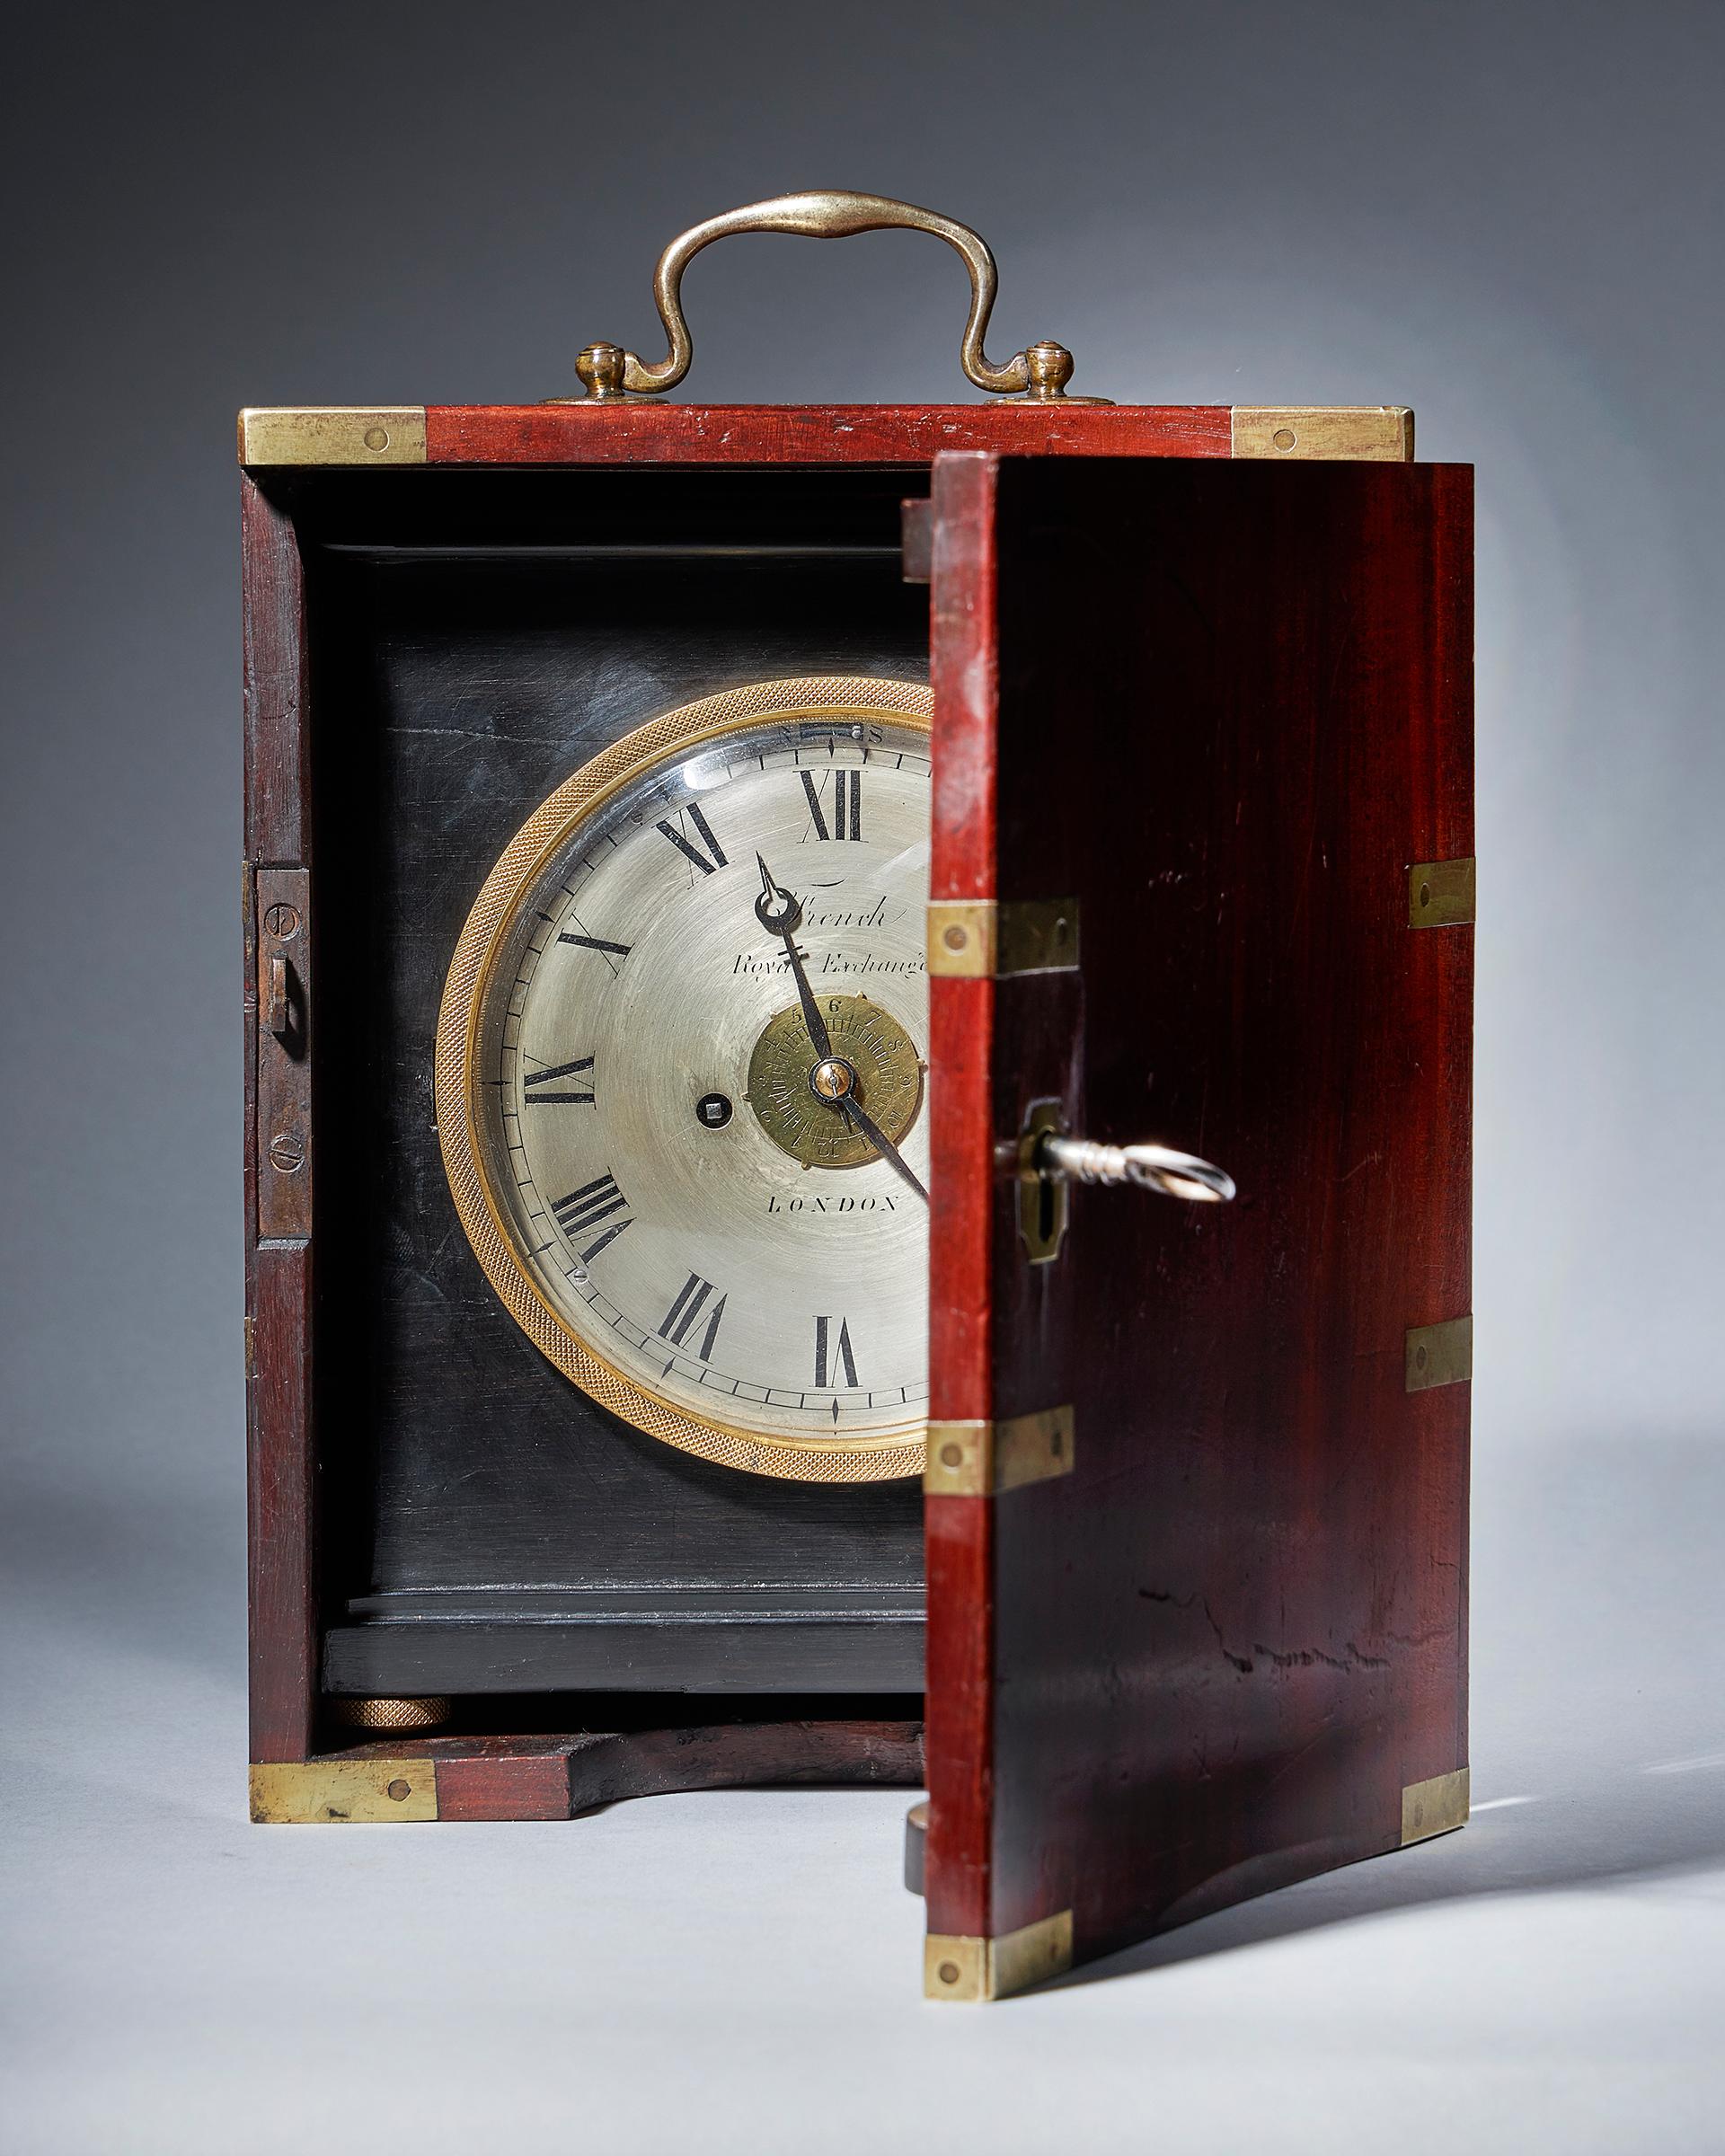 Regency Extremely Rare 19th Century Traveling Clock Signed French Royal Exchange, London